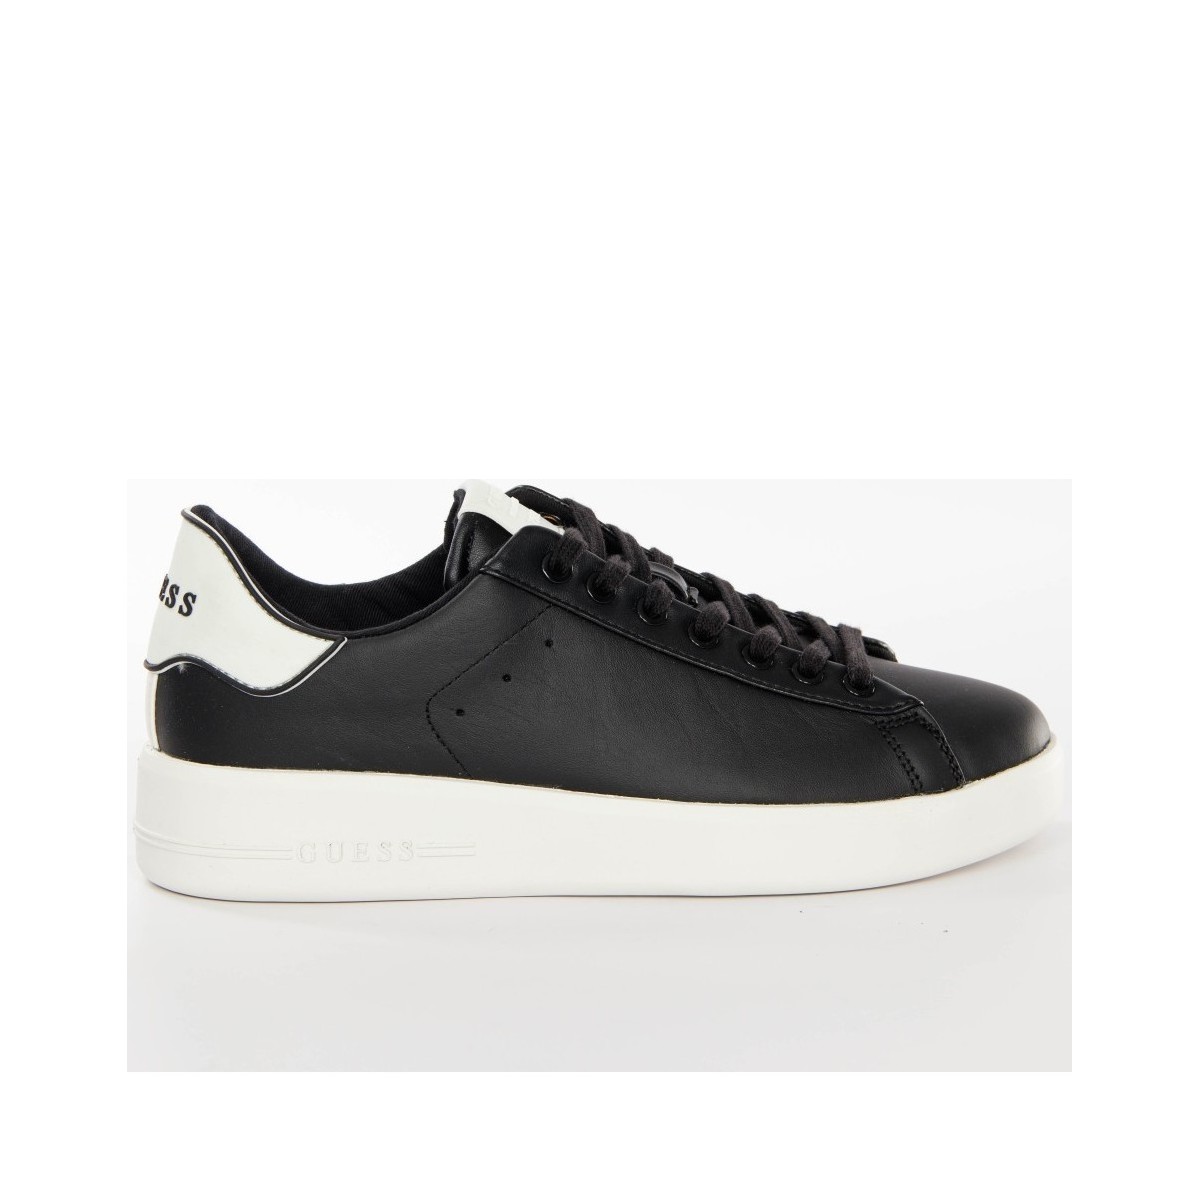 Chaussures Homme Baskets basses Guess Style retro logo Noir